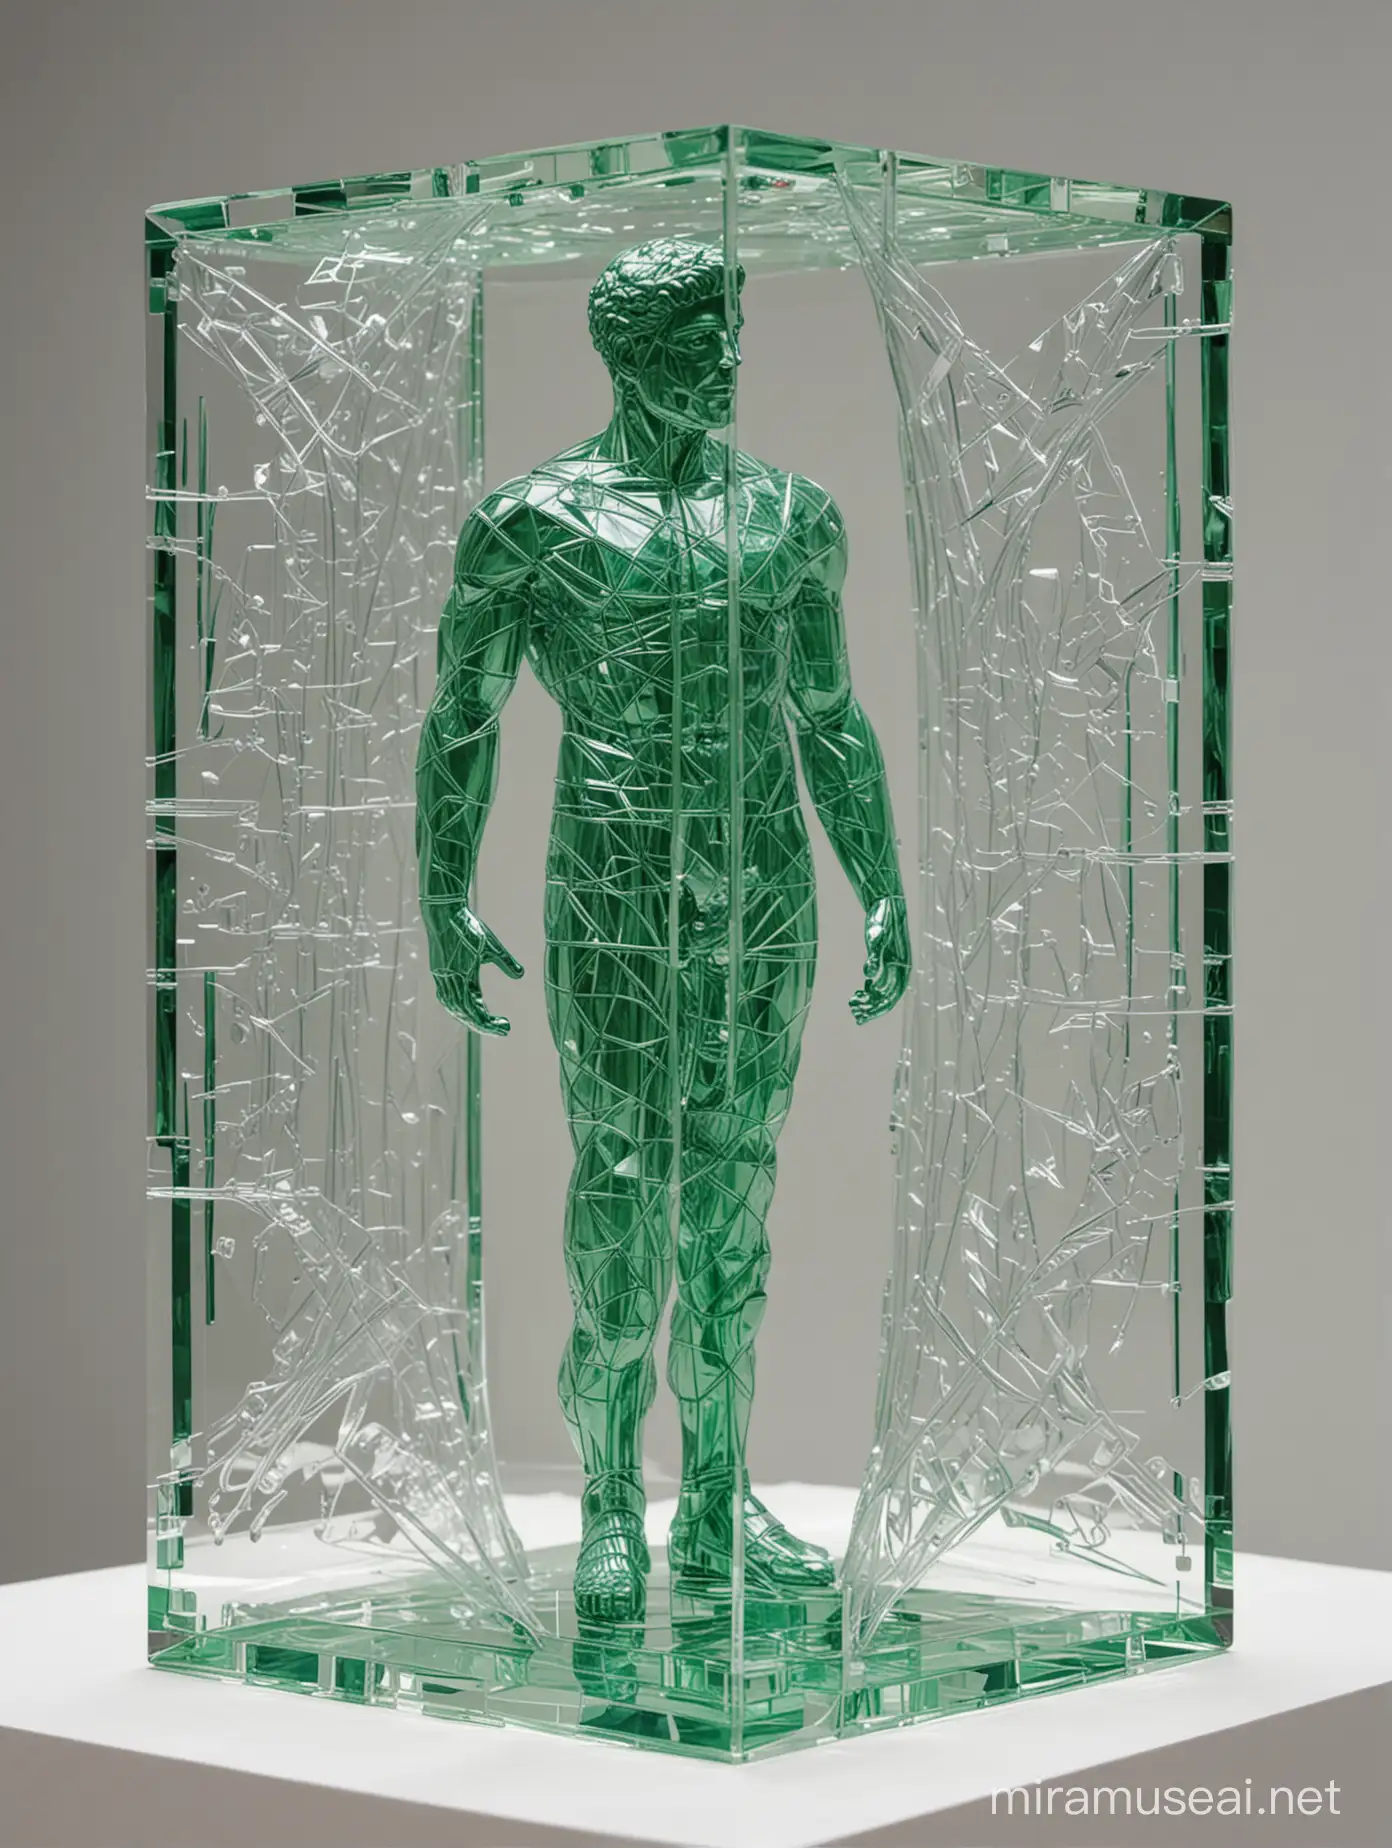 Translucent Green Geometric Plastic Sculpture A Fusion of Renaissance and Postmodernism